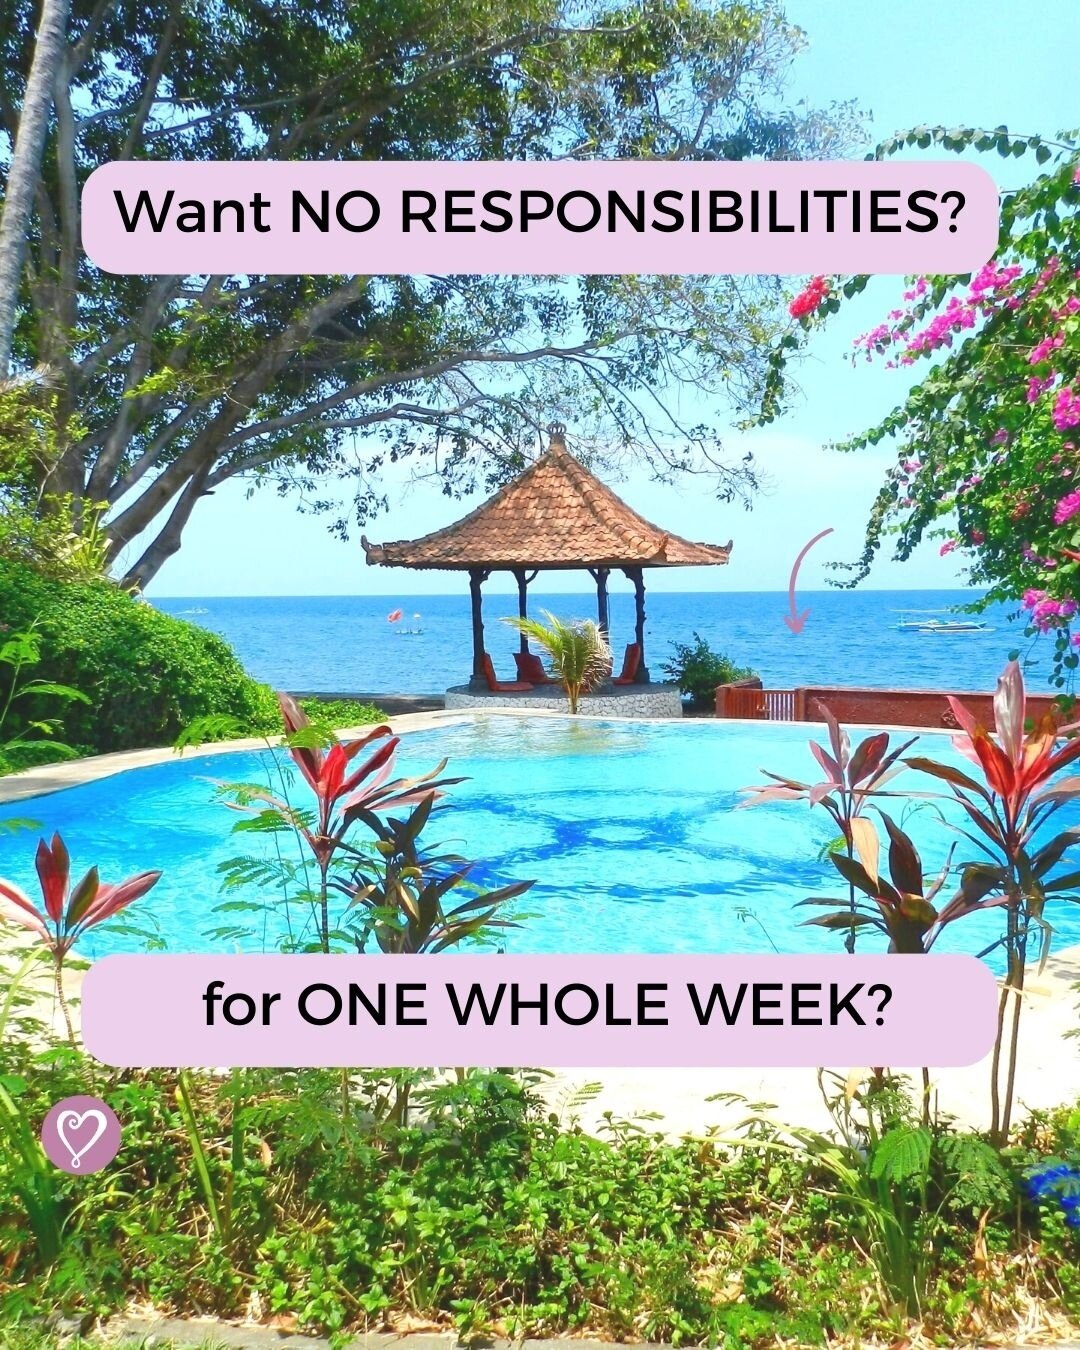 ONE WHOLE WEEK!!!⁠
⁠
Bliss⁠
⁠
Freedom from responsibilities⁠
⁠
Why wouldn't ya?!⁠
⁠
EARLYBIRD pricing expires on 10th May!⁠
⁠
Link in Bio for all the deets⁠
⁠
Info session MON 8 pm NZST on Zoom⁠
Come and find out ALL the juicy deets there!⁠
⁠
Jen x⁠
